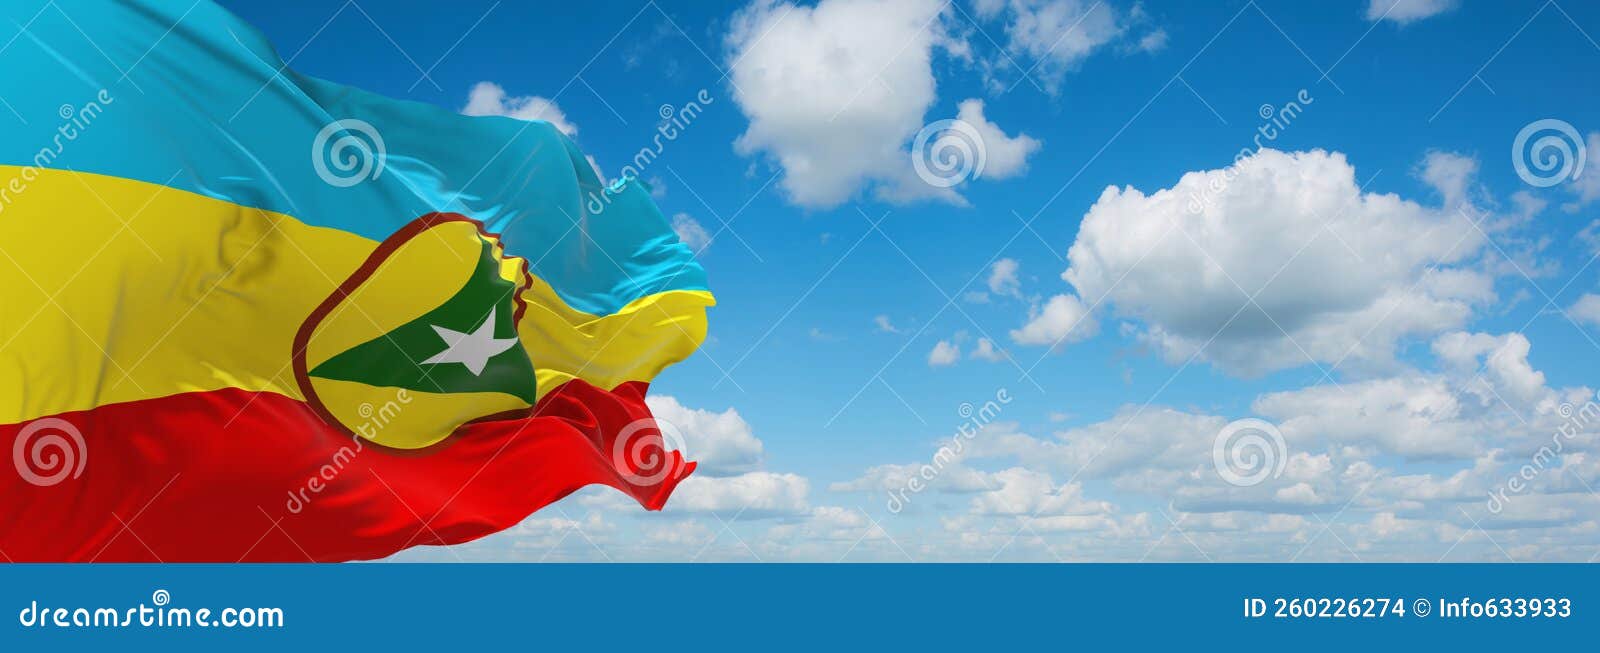 flag of cabinda flec propose, africa at cloudy sky background, panoramic view. flag representing extinct country,ethnic group or